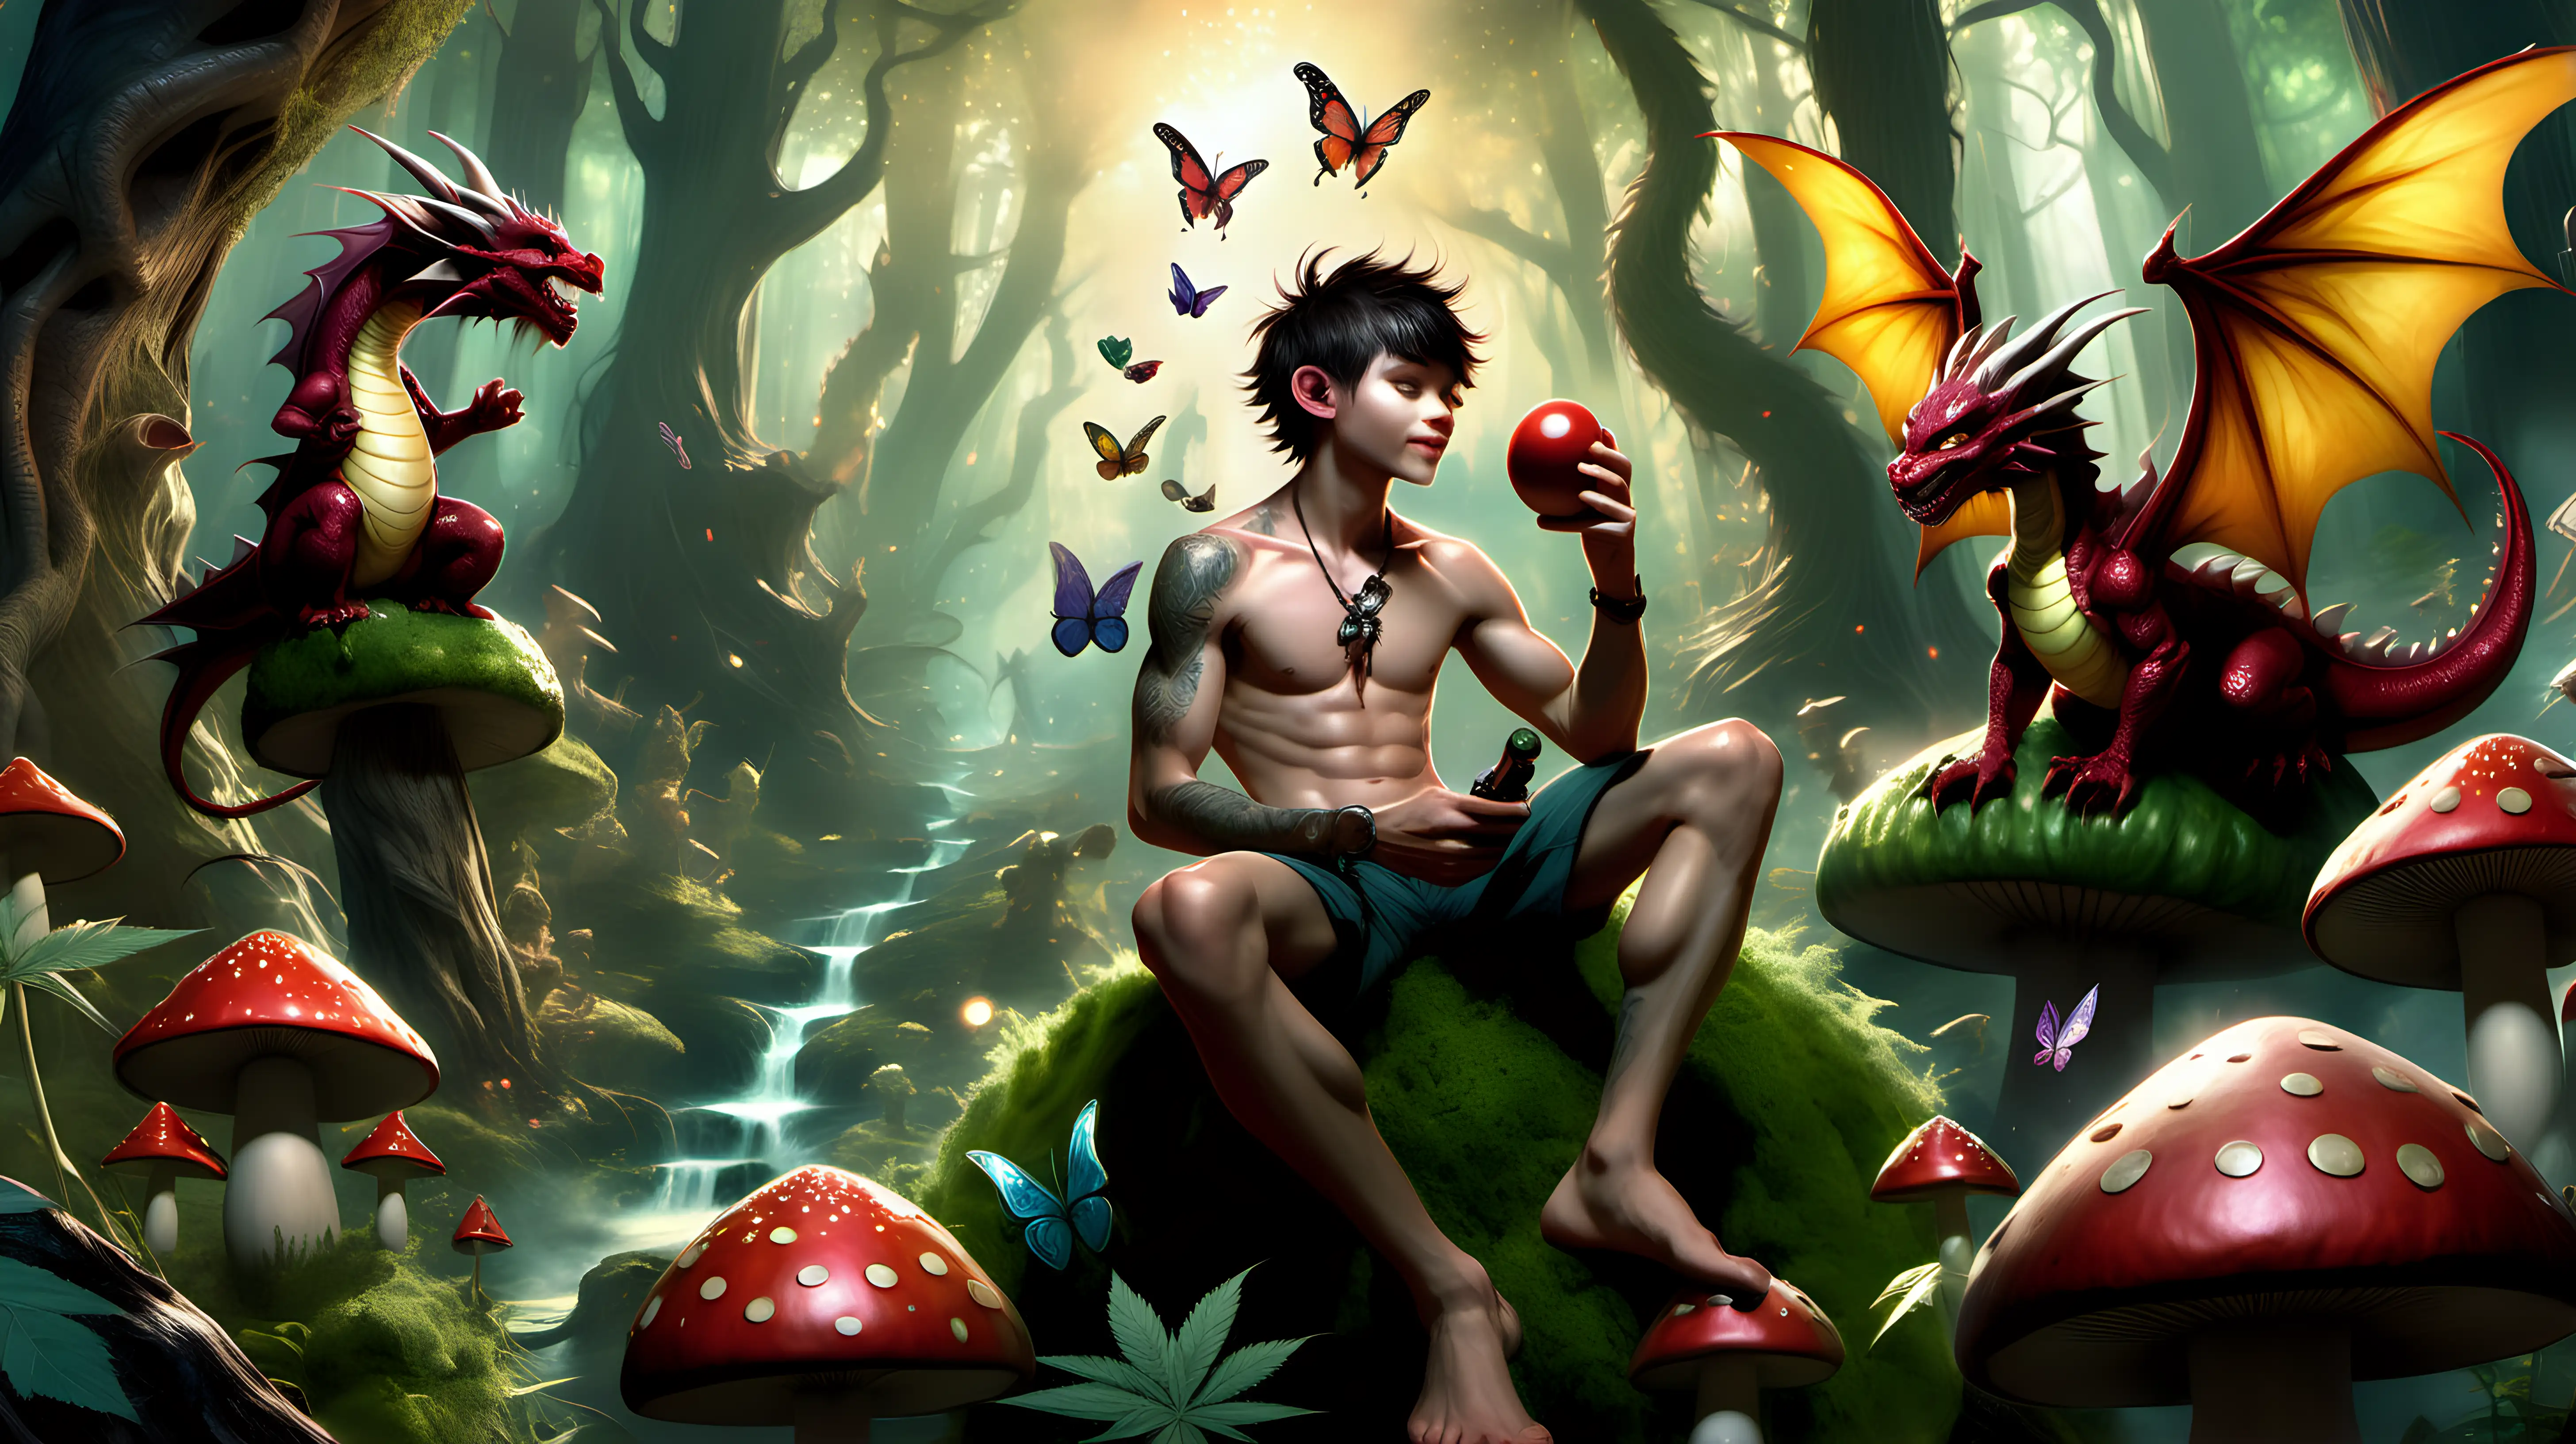 Dragon Boy Relaxing in Cannabis Forest with Pixies and Dragon Egg